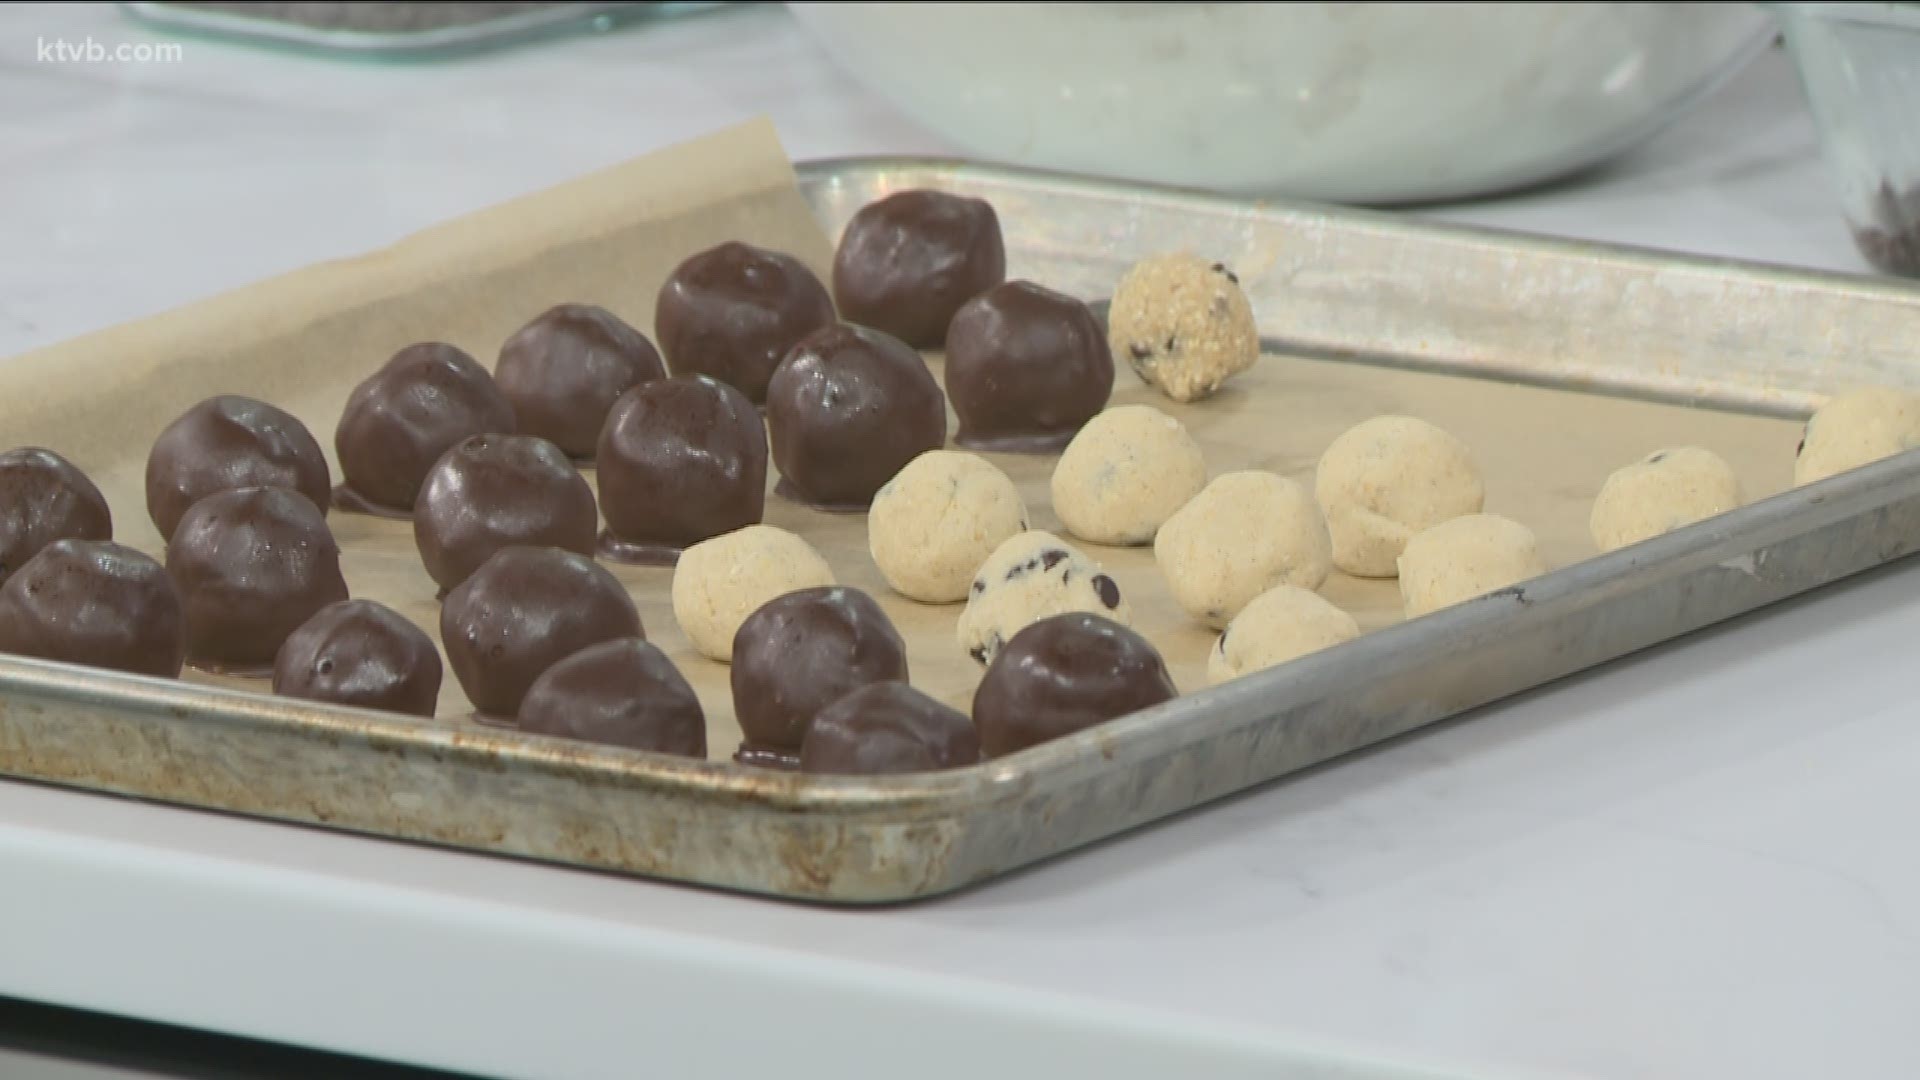 Chef Christina Murray joins Tami Tremblay and Jim Duthie in the KTVB kitchen studio to show how to make her chocolate chip cough dough brownie truffles for the perfect holiday gift and dessert.